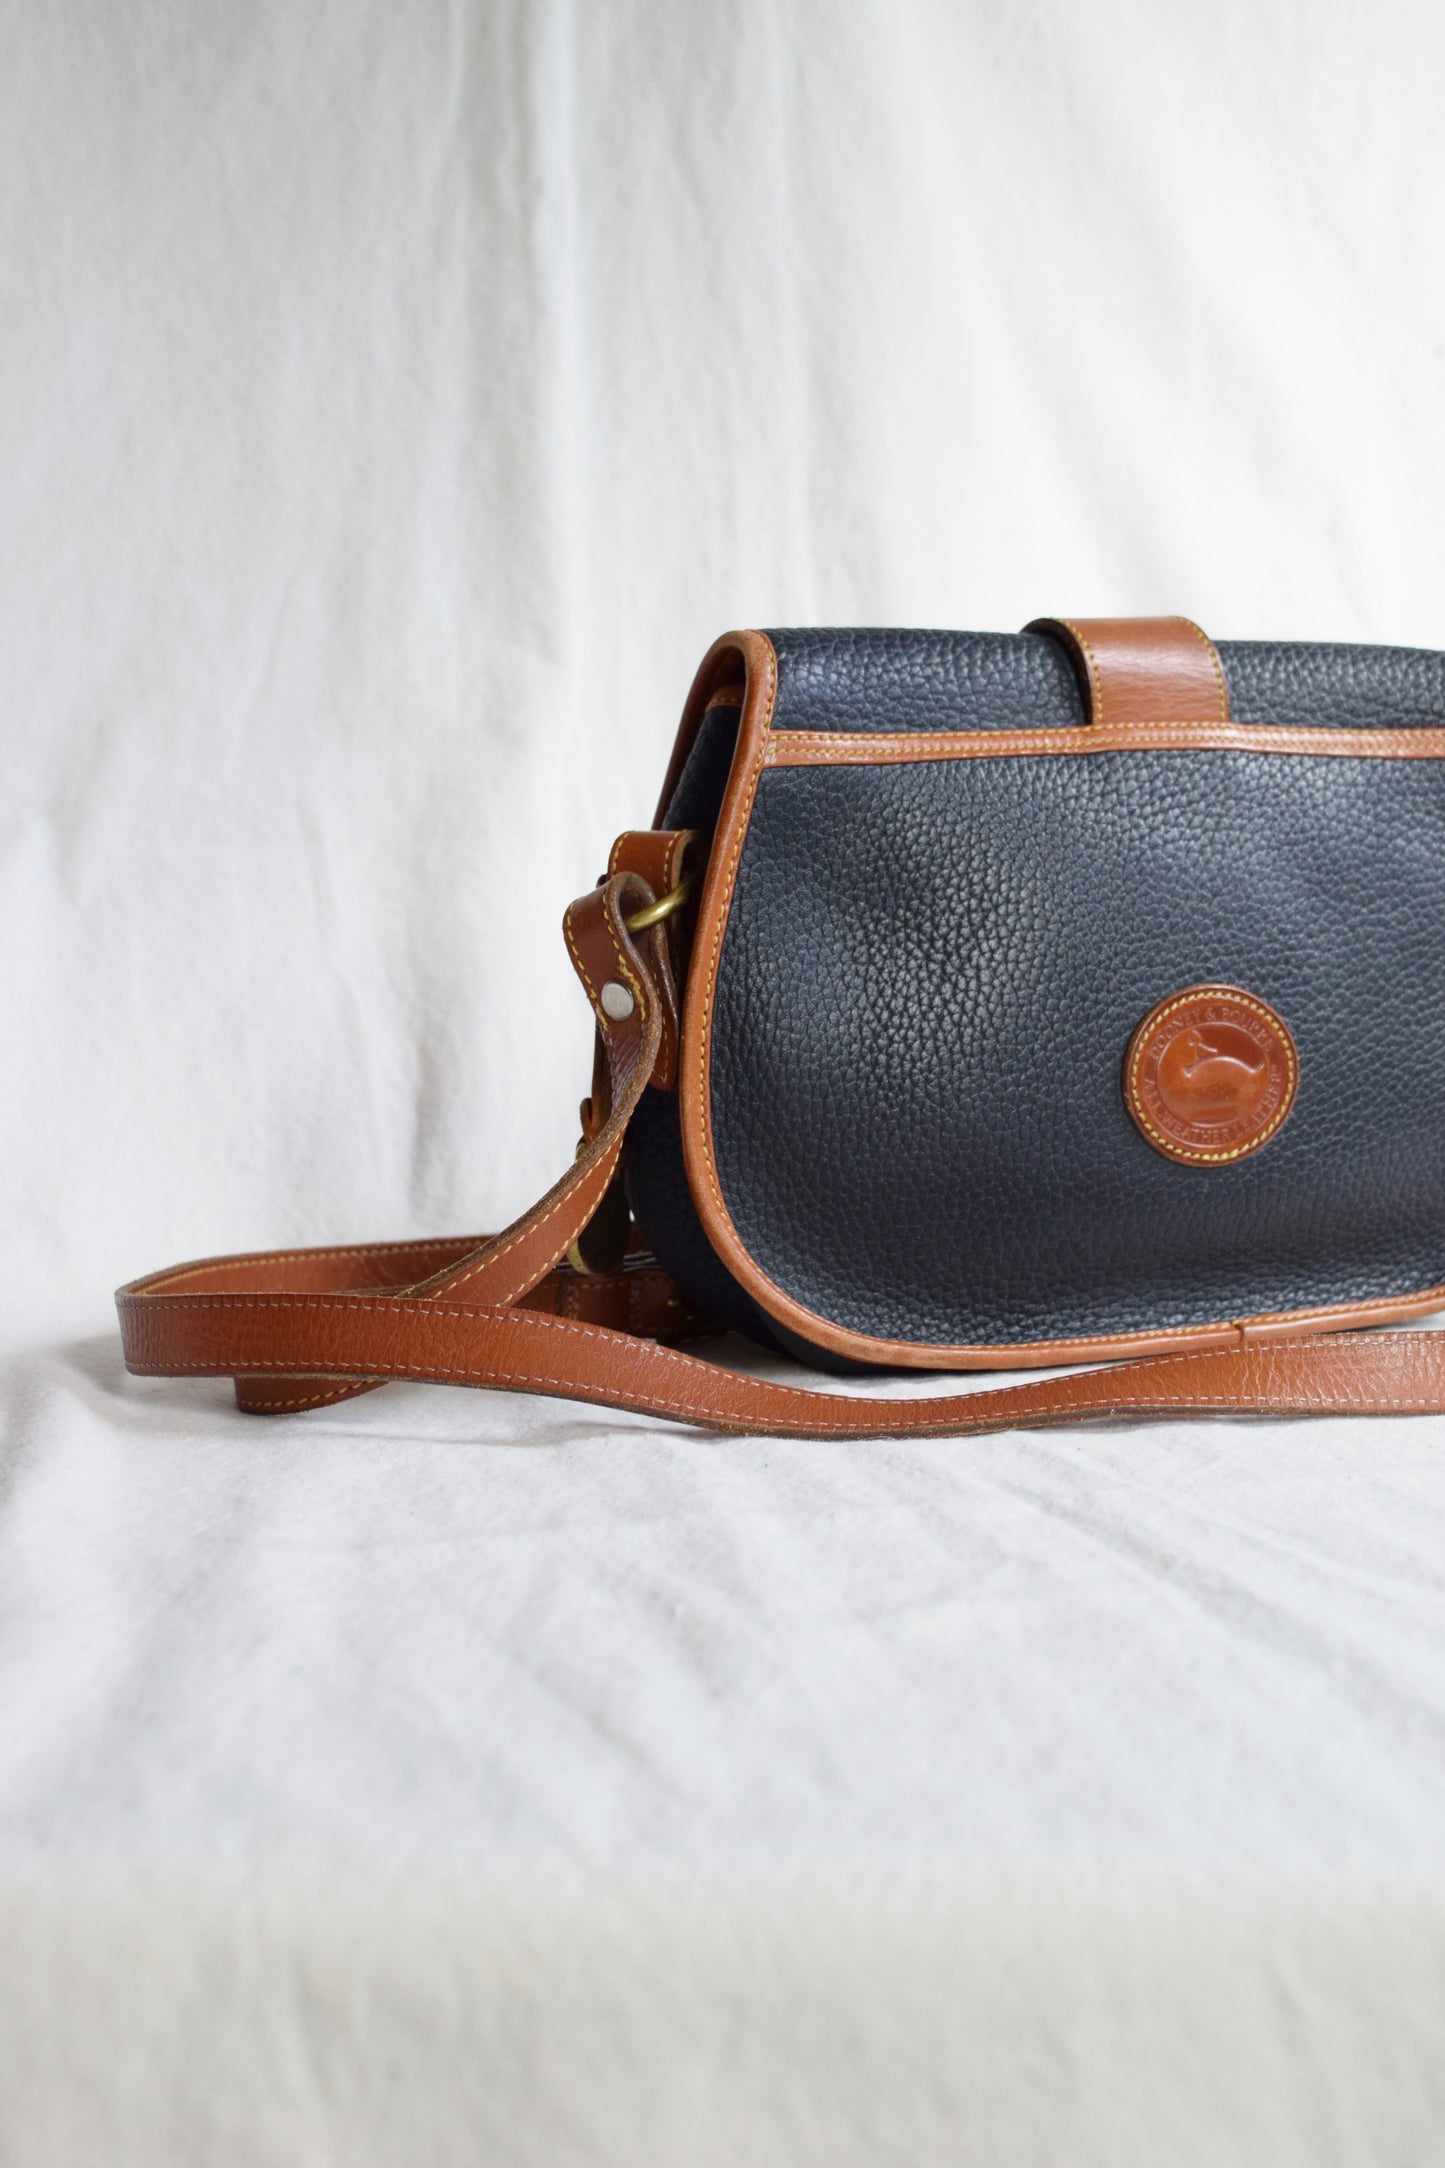 Vintage Dooney & Bourke Crossbody Saddle Bag in Navy and British Tan | All Weather Leather